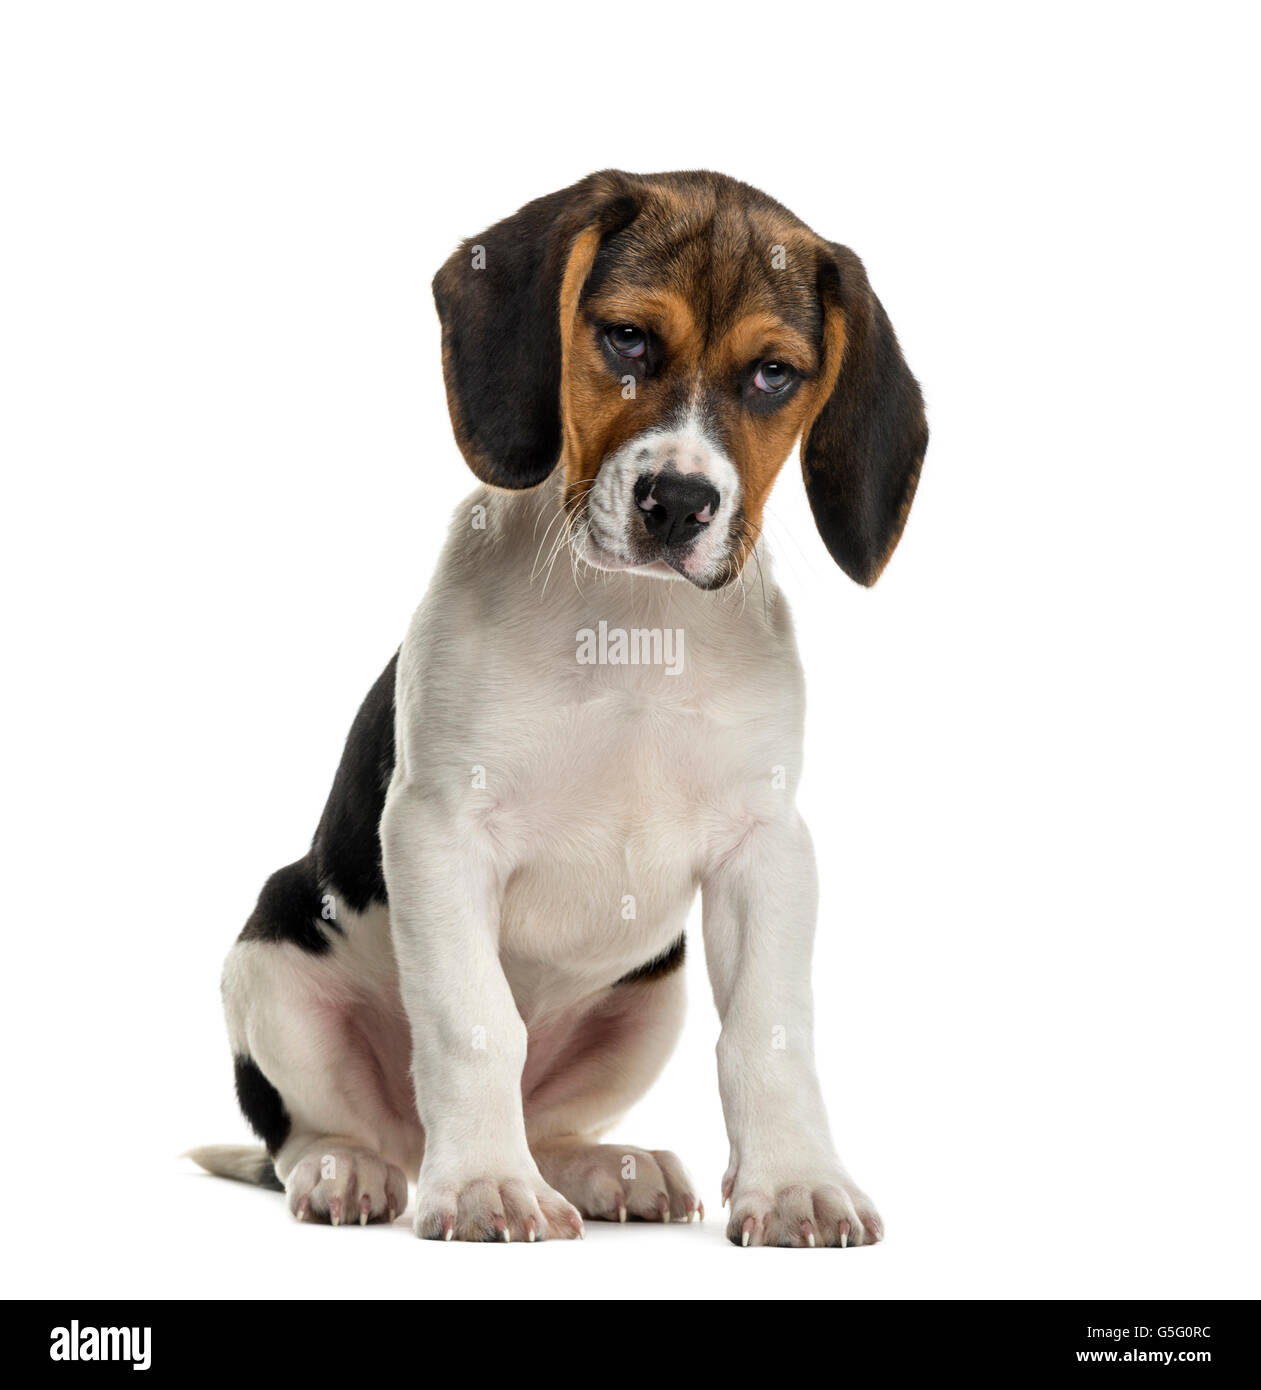 Sulking Beagle in front of white background Stock Photo